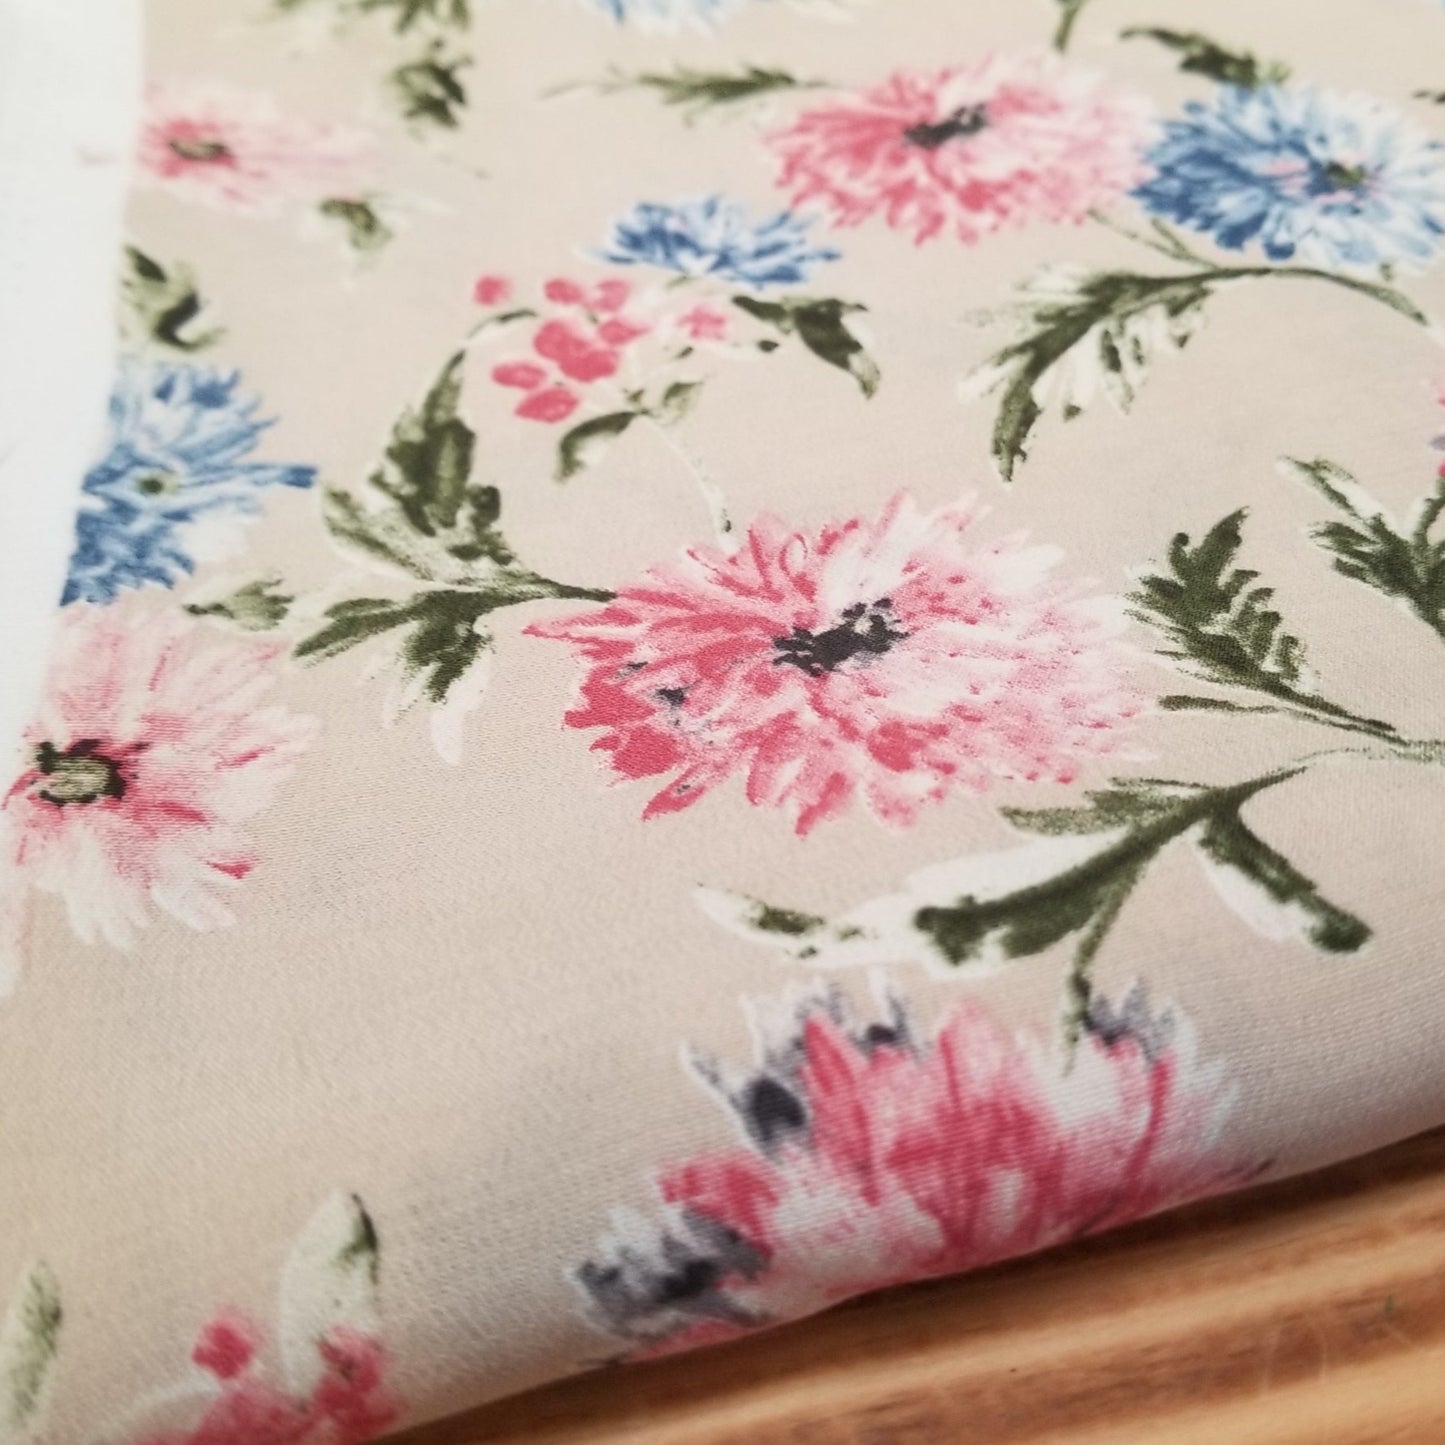 Designer Deadstock Vintage Blue and Pink Florals Rayon Woven- price per yard